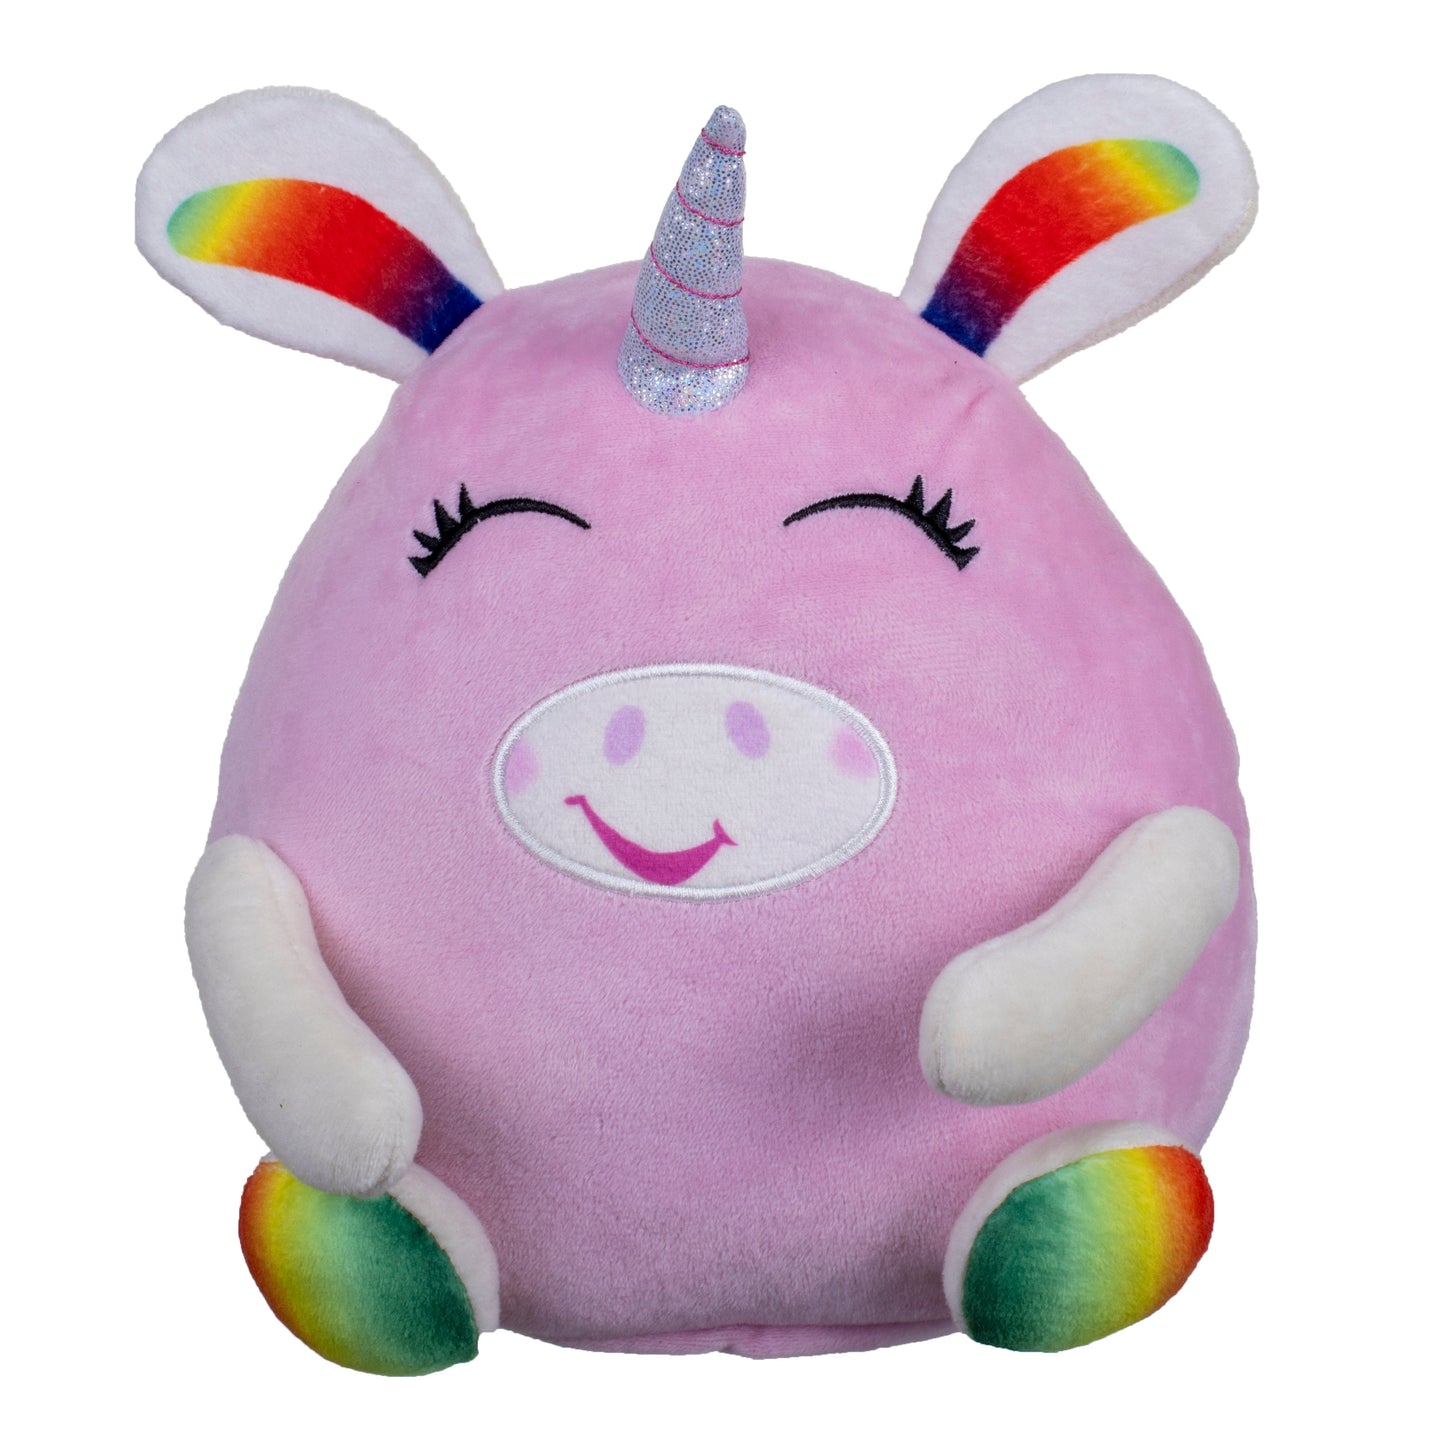 Unicorn - Windy Bums Cheeky Wiggly Jiggly Giggly Plush Toy for Kids